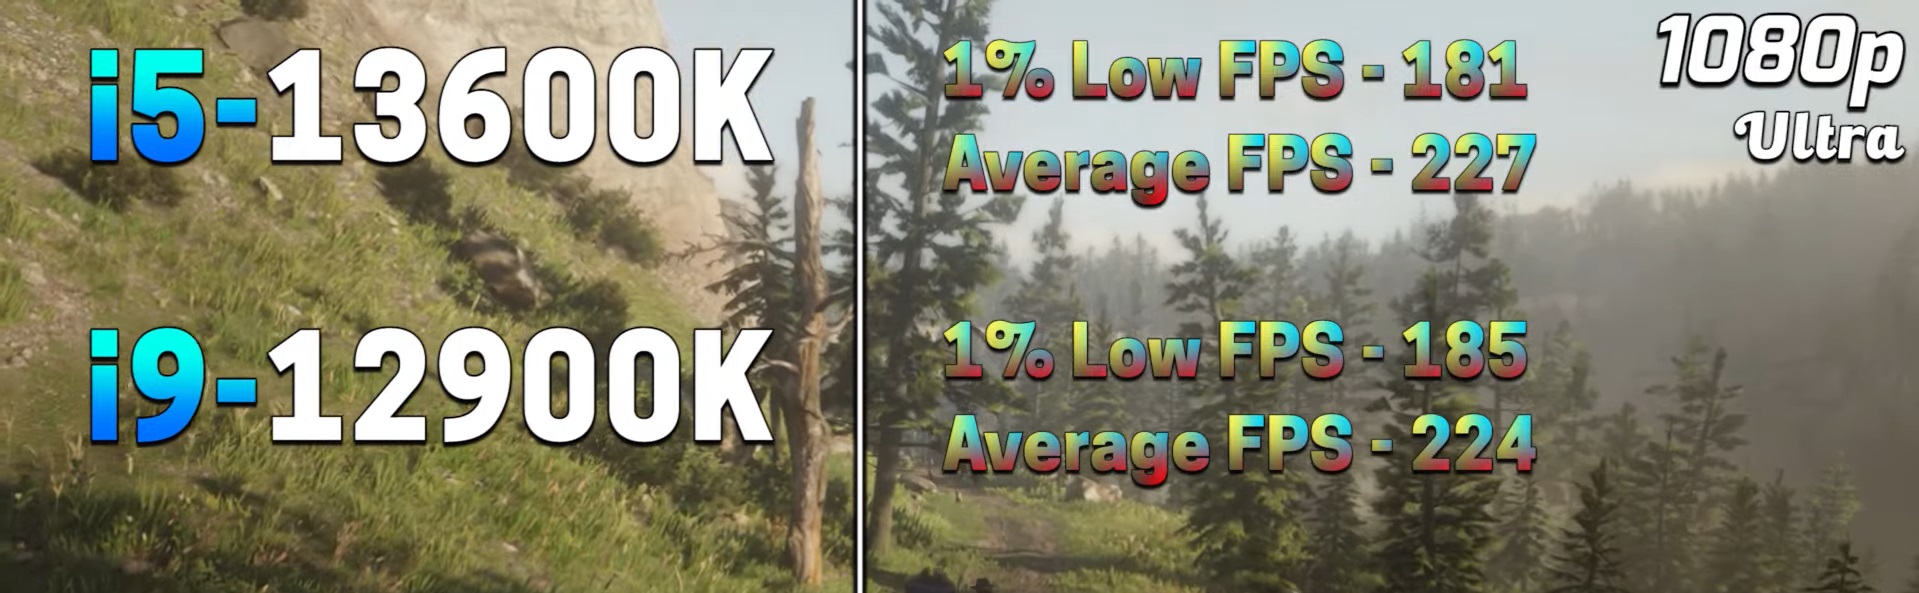 Red Dead Redemption 2 1080p benchmark